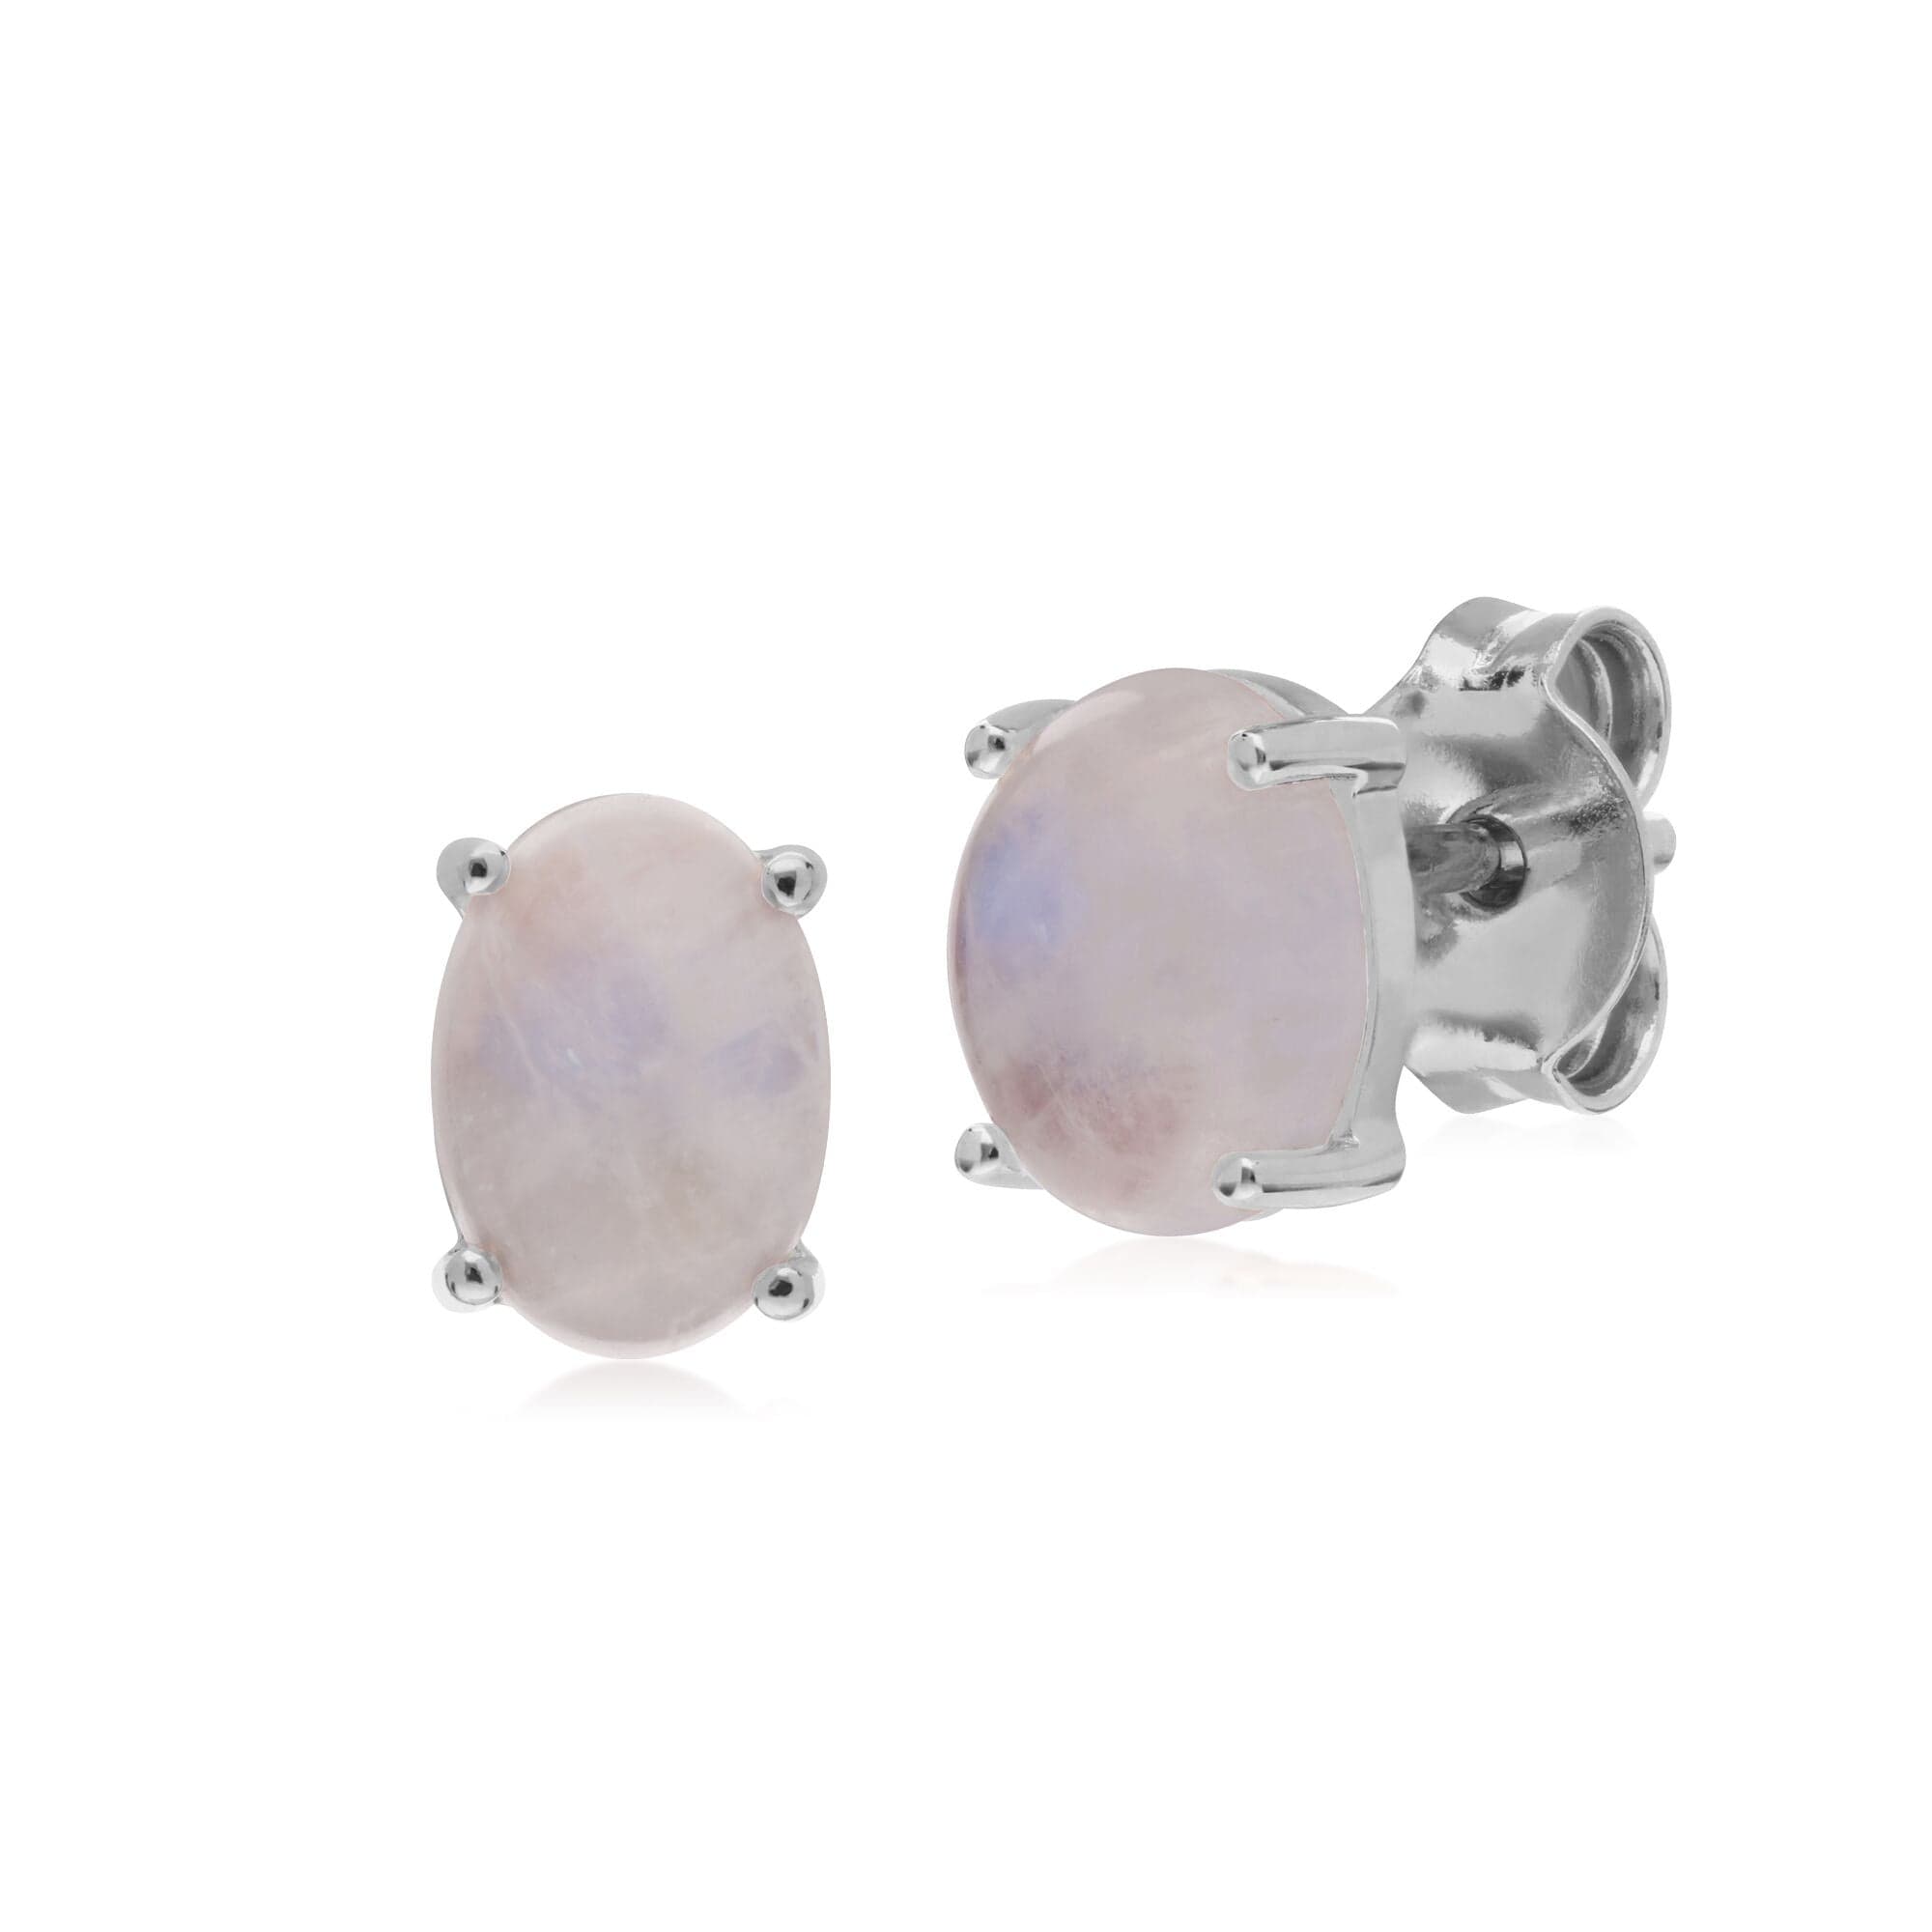 270E023905925-270P023805925 Classic Oval Rainbow Moonstone Stud Earrings & Pendant Set in 925 Sterling Silver 2